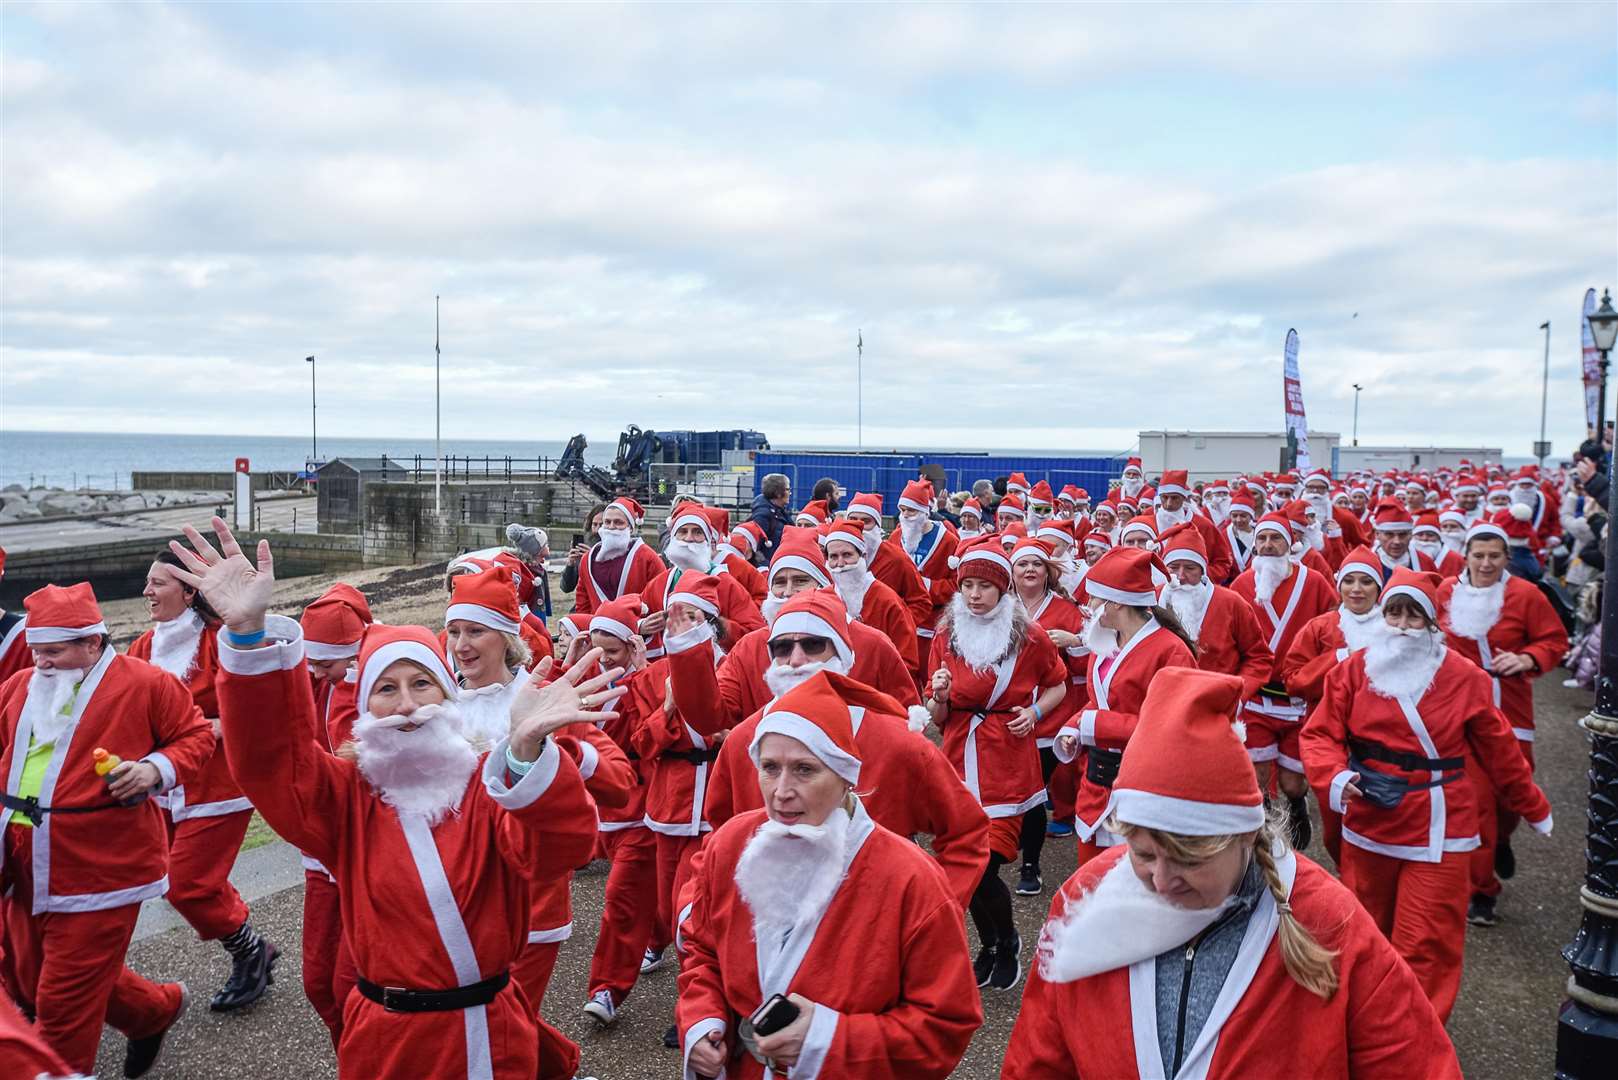 Hundreds gather for Santas on the Run! in Herne Bay